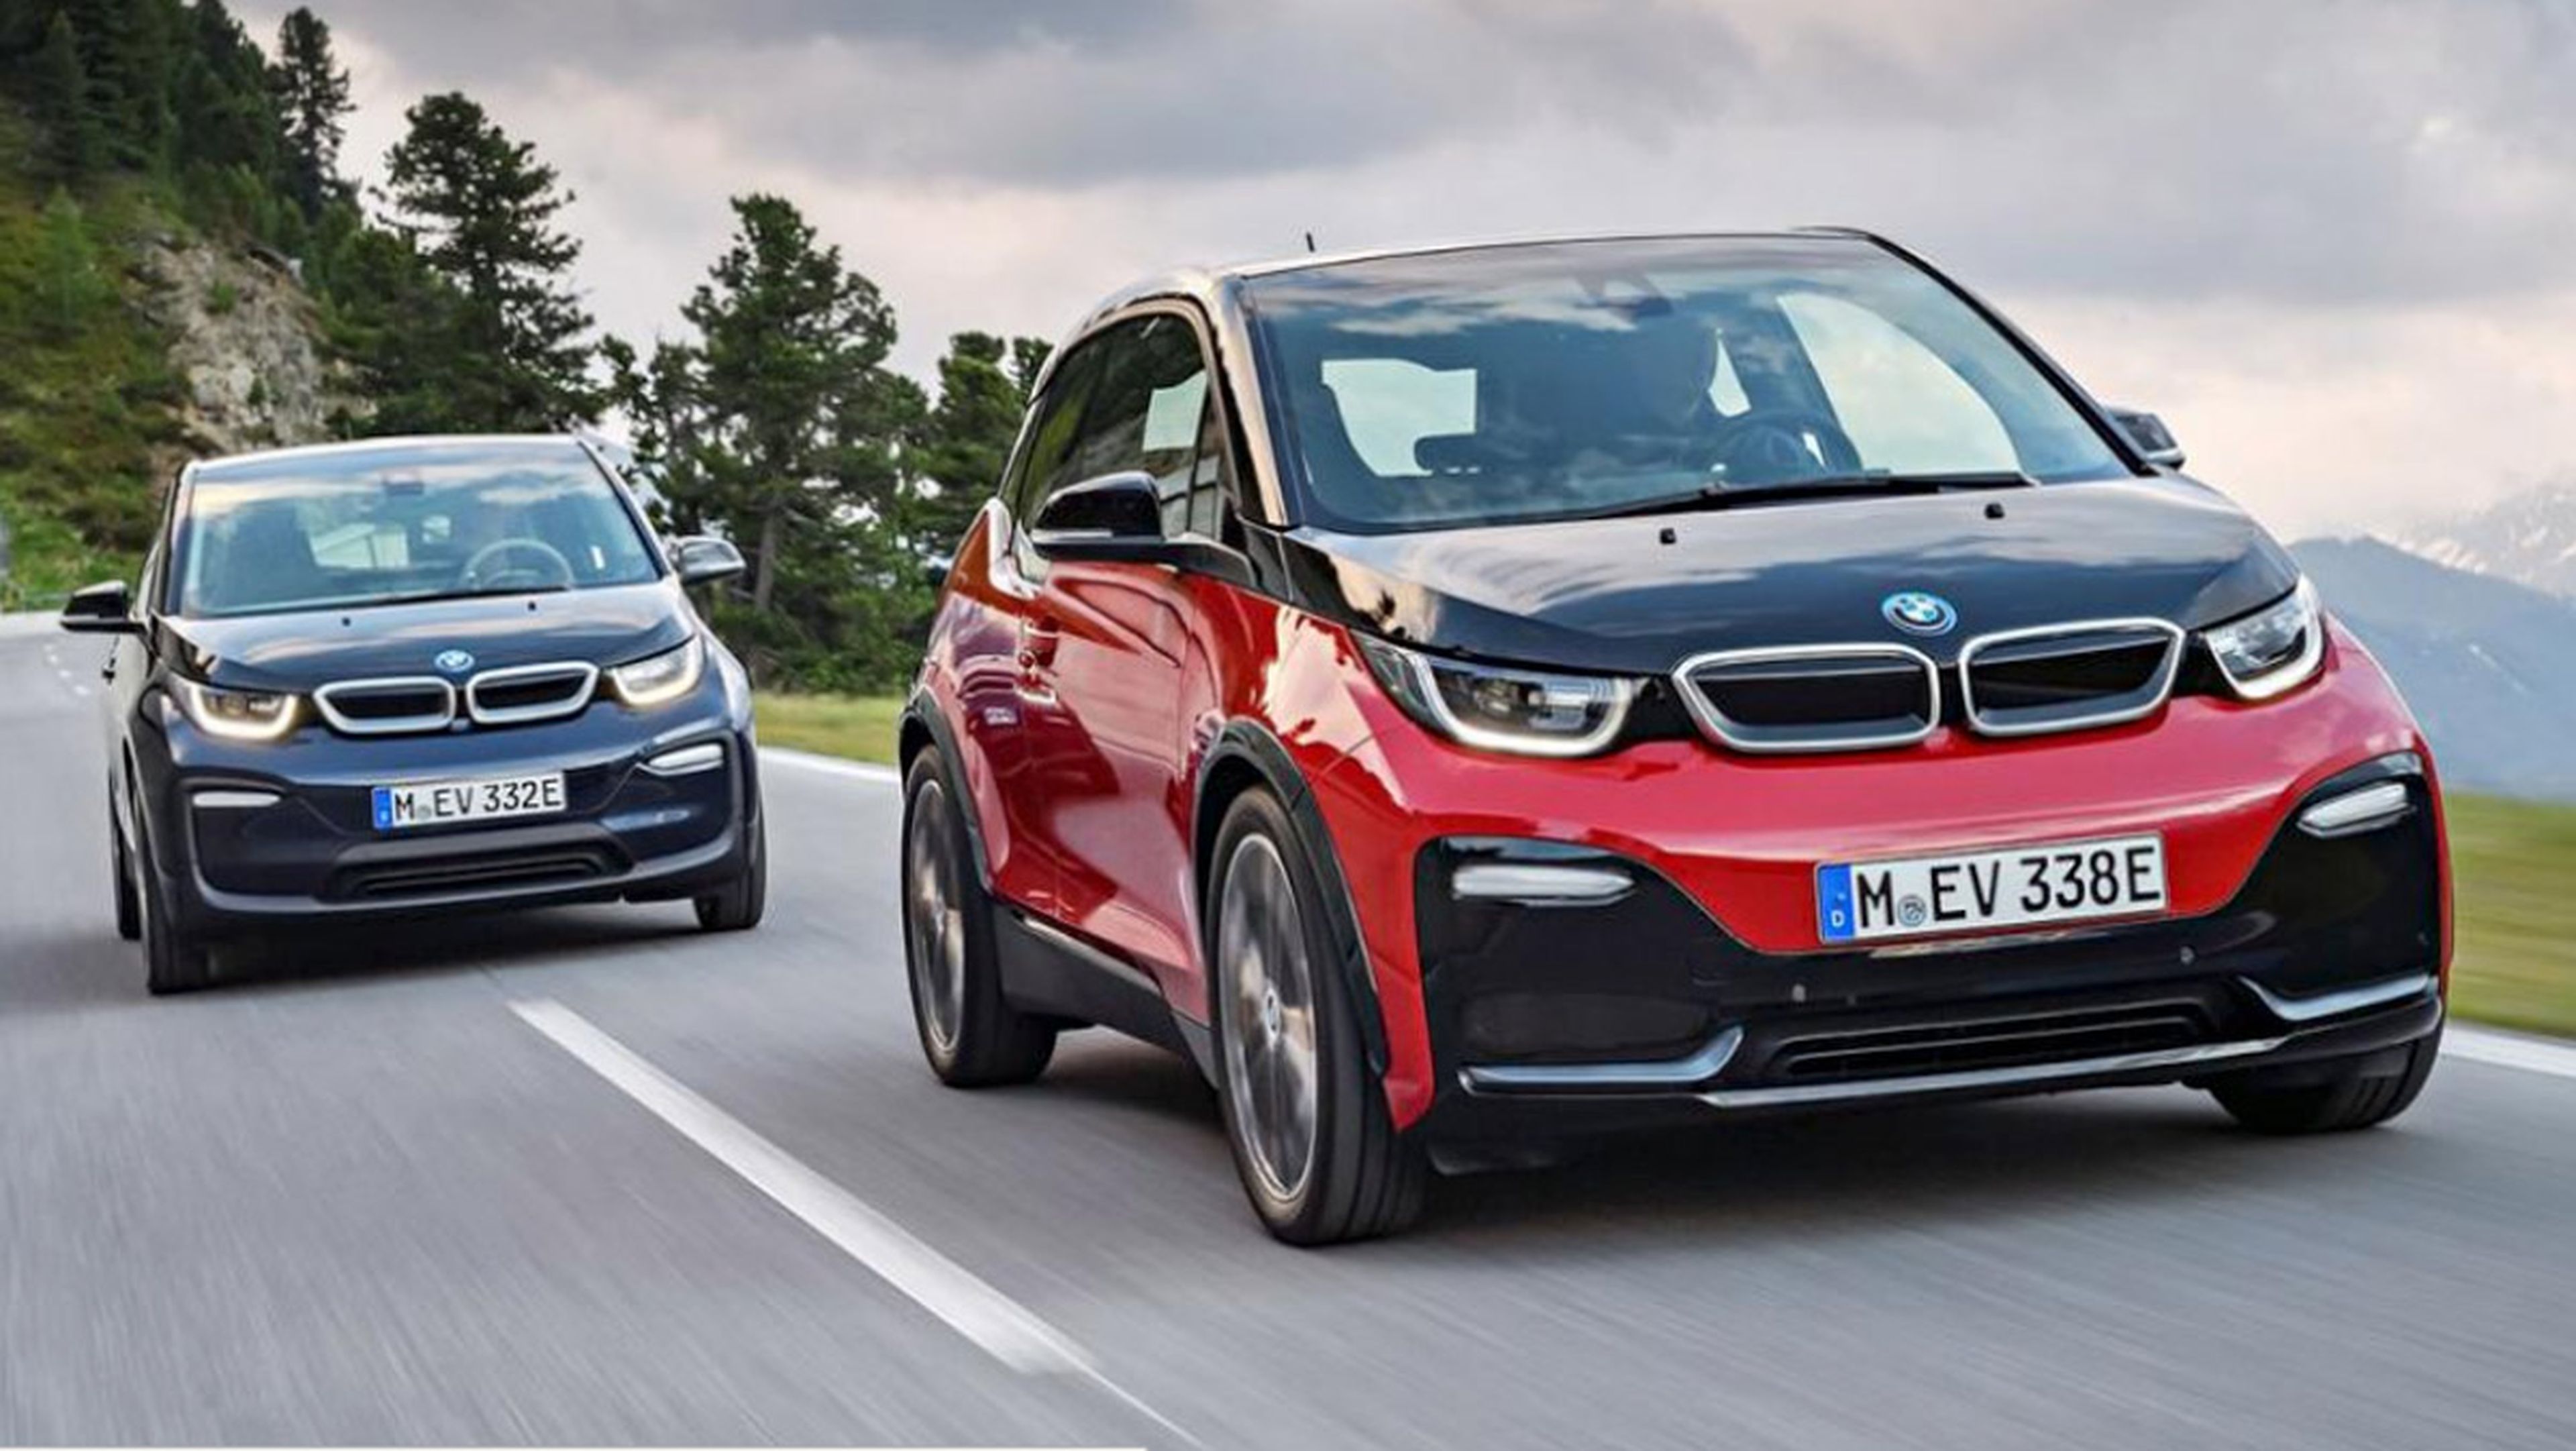 Coches 2017: BMW i3s